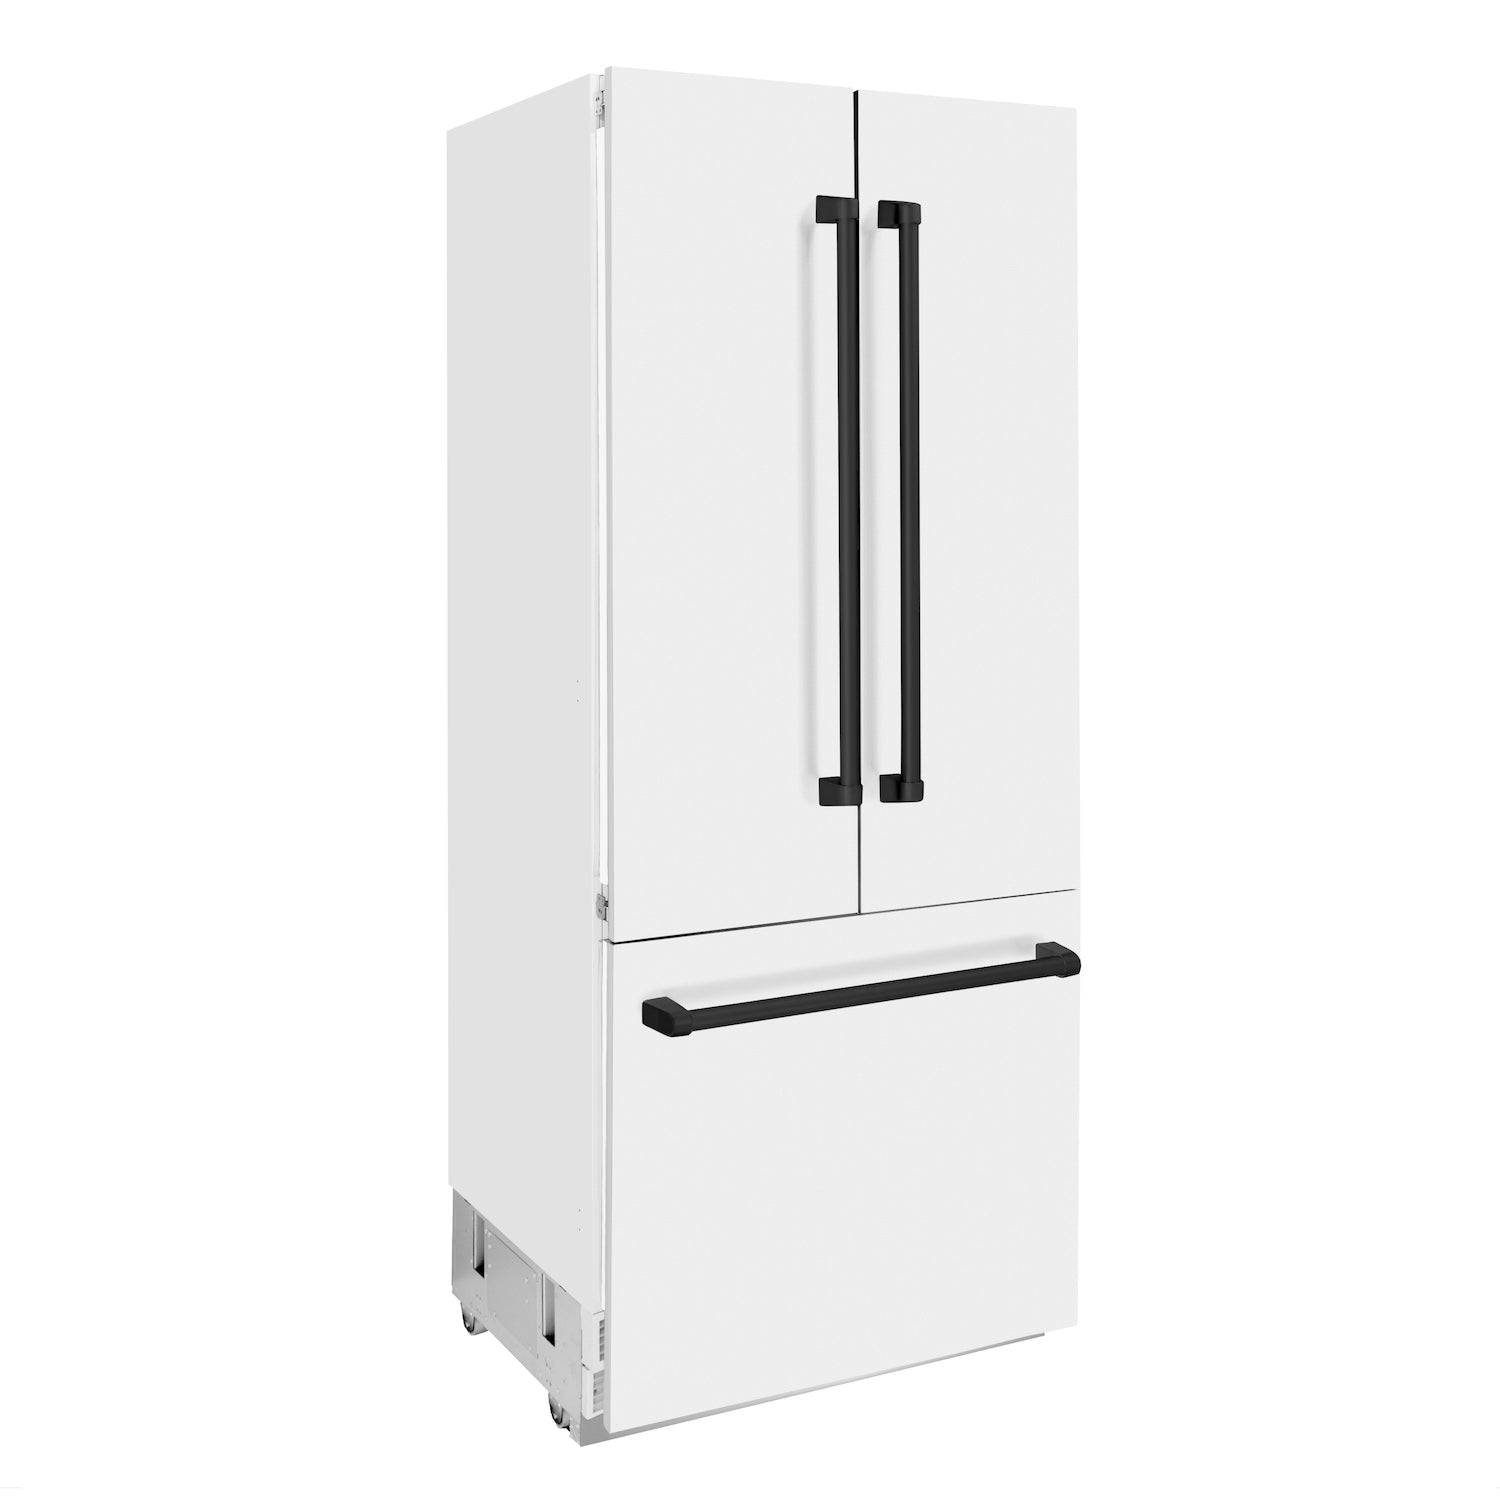 ZLINE 36" Autograph Edition 19.6 cu. ft. Built-in 3-Door French Door Refrigerator with Internal Water and Ice Dispenser in White Matte with Matte Black Accents (RBIVZ-WM-36-MB)